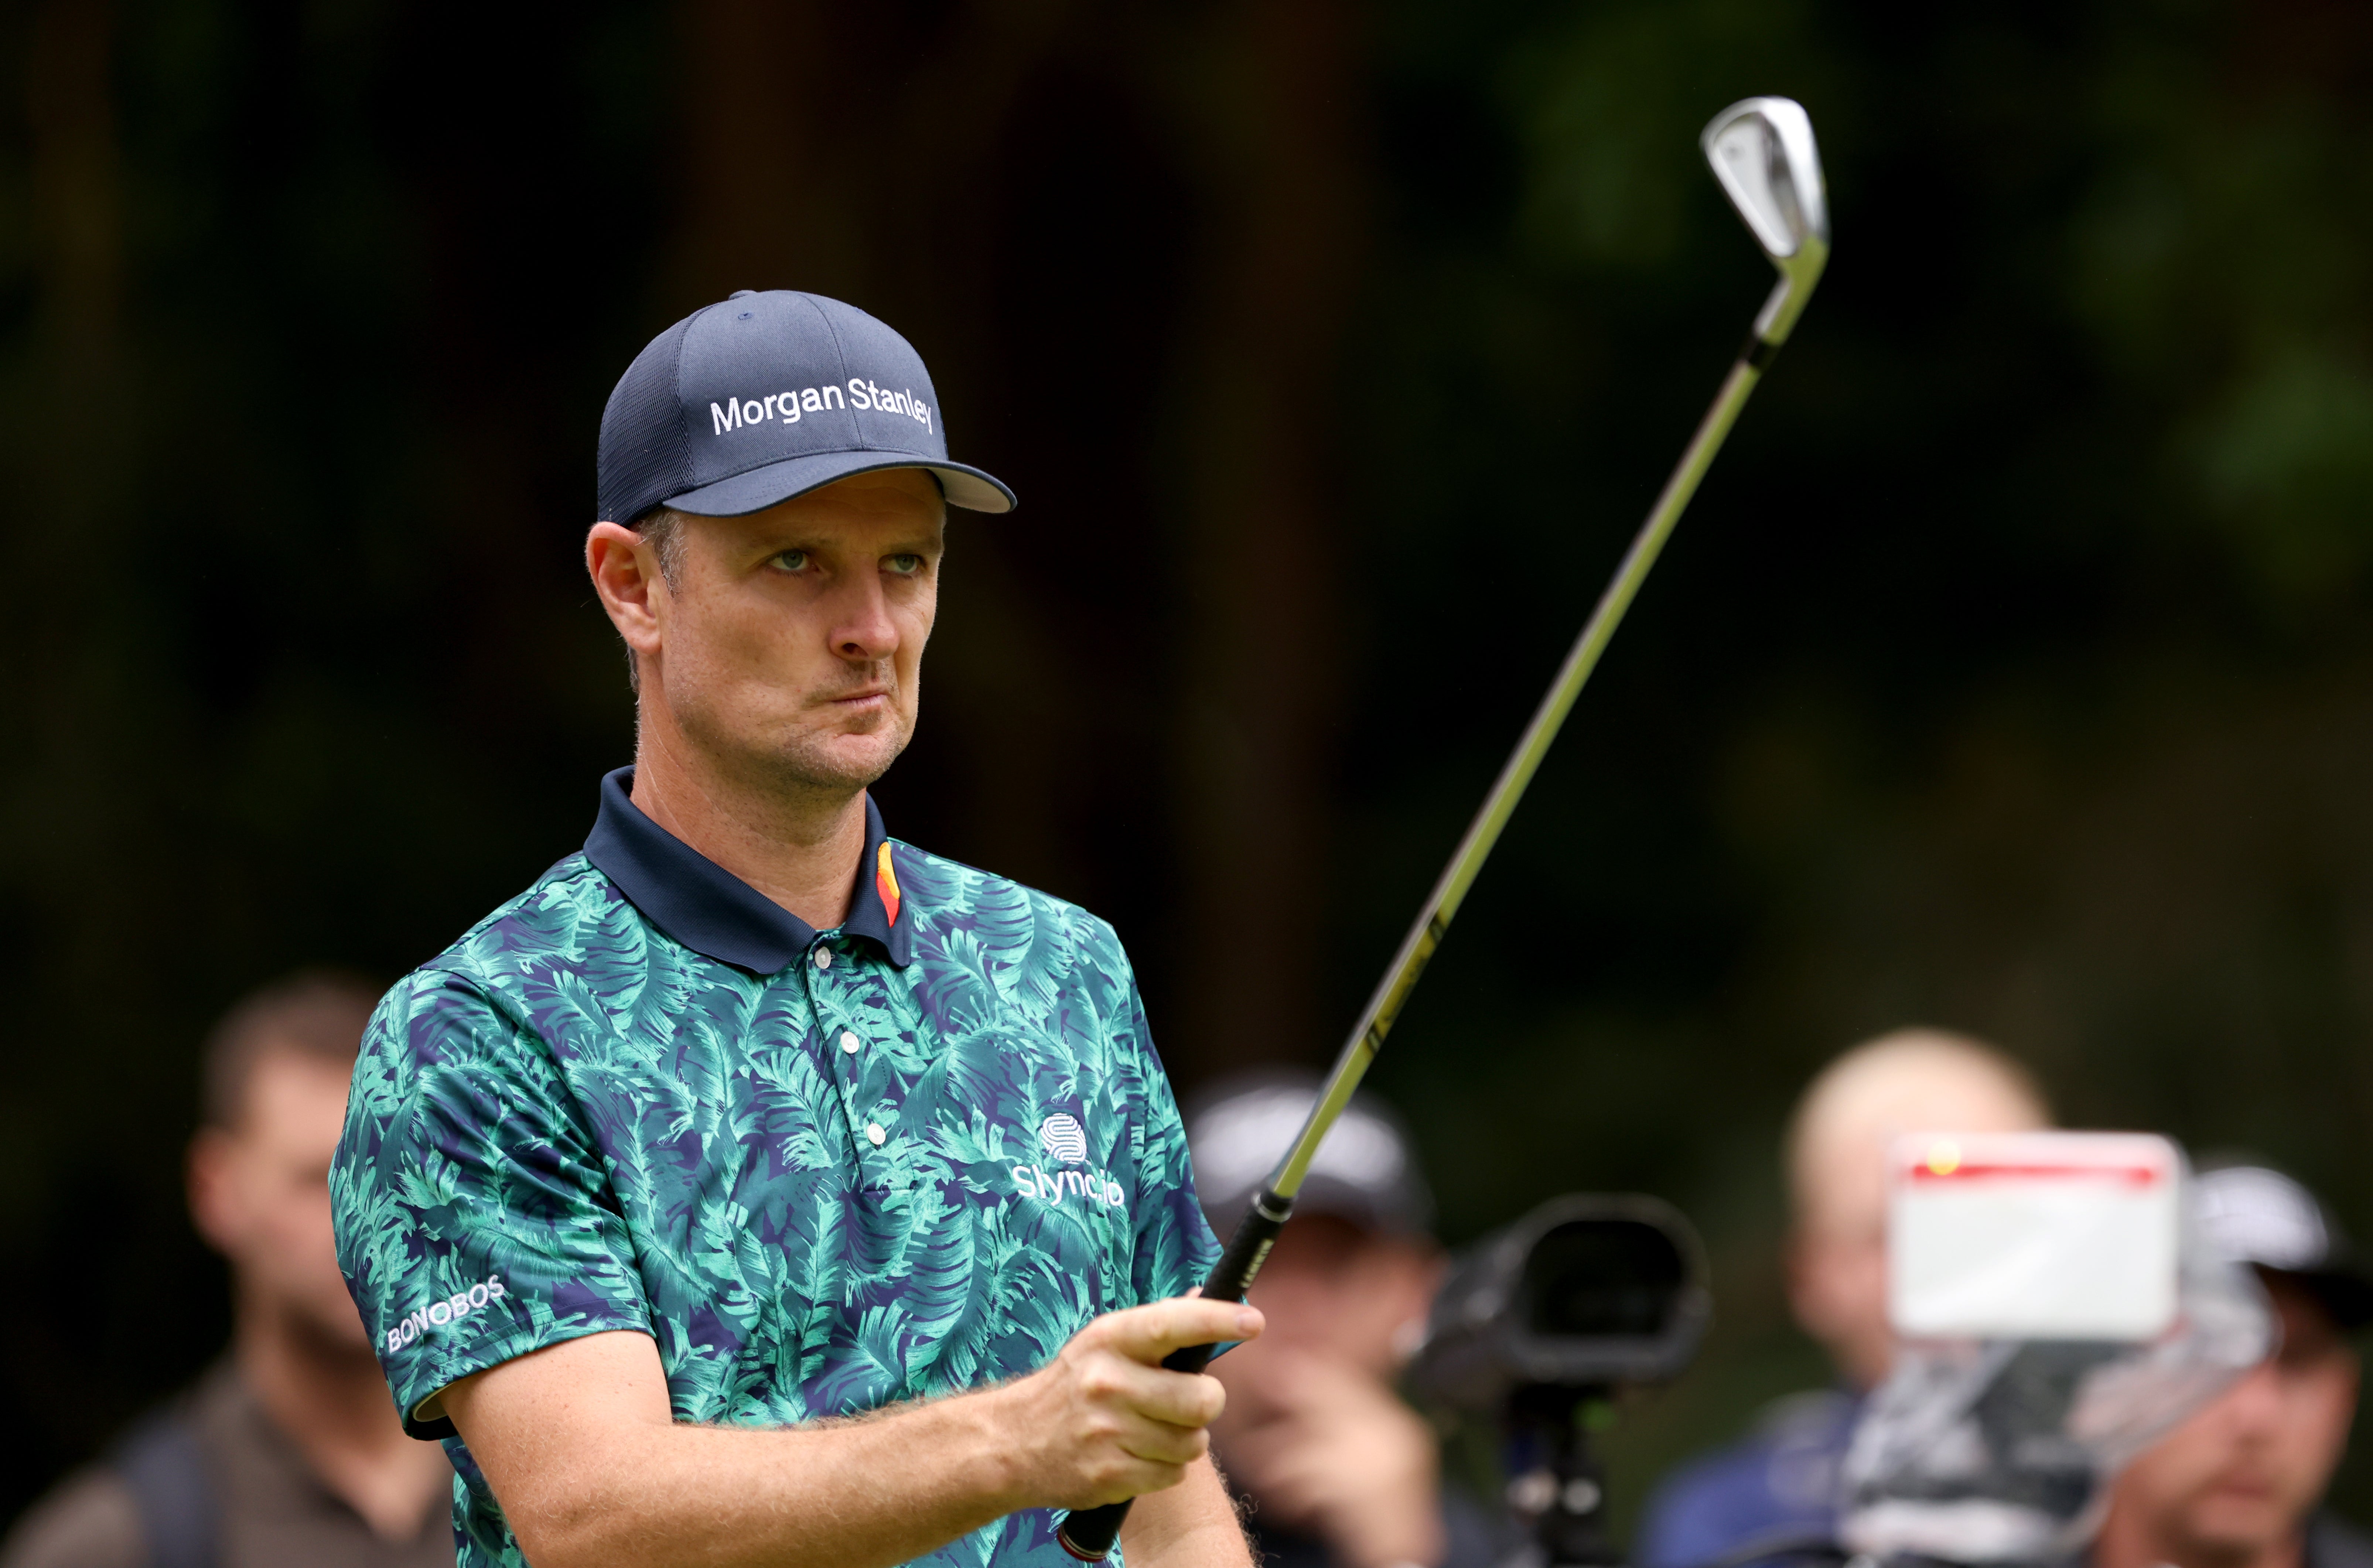 Justin Rose on the 14th tee during day one of the BMW PGA Championship at Wentworth (Steven Paston/PA)